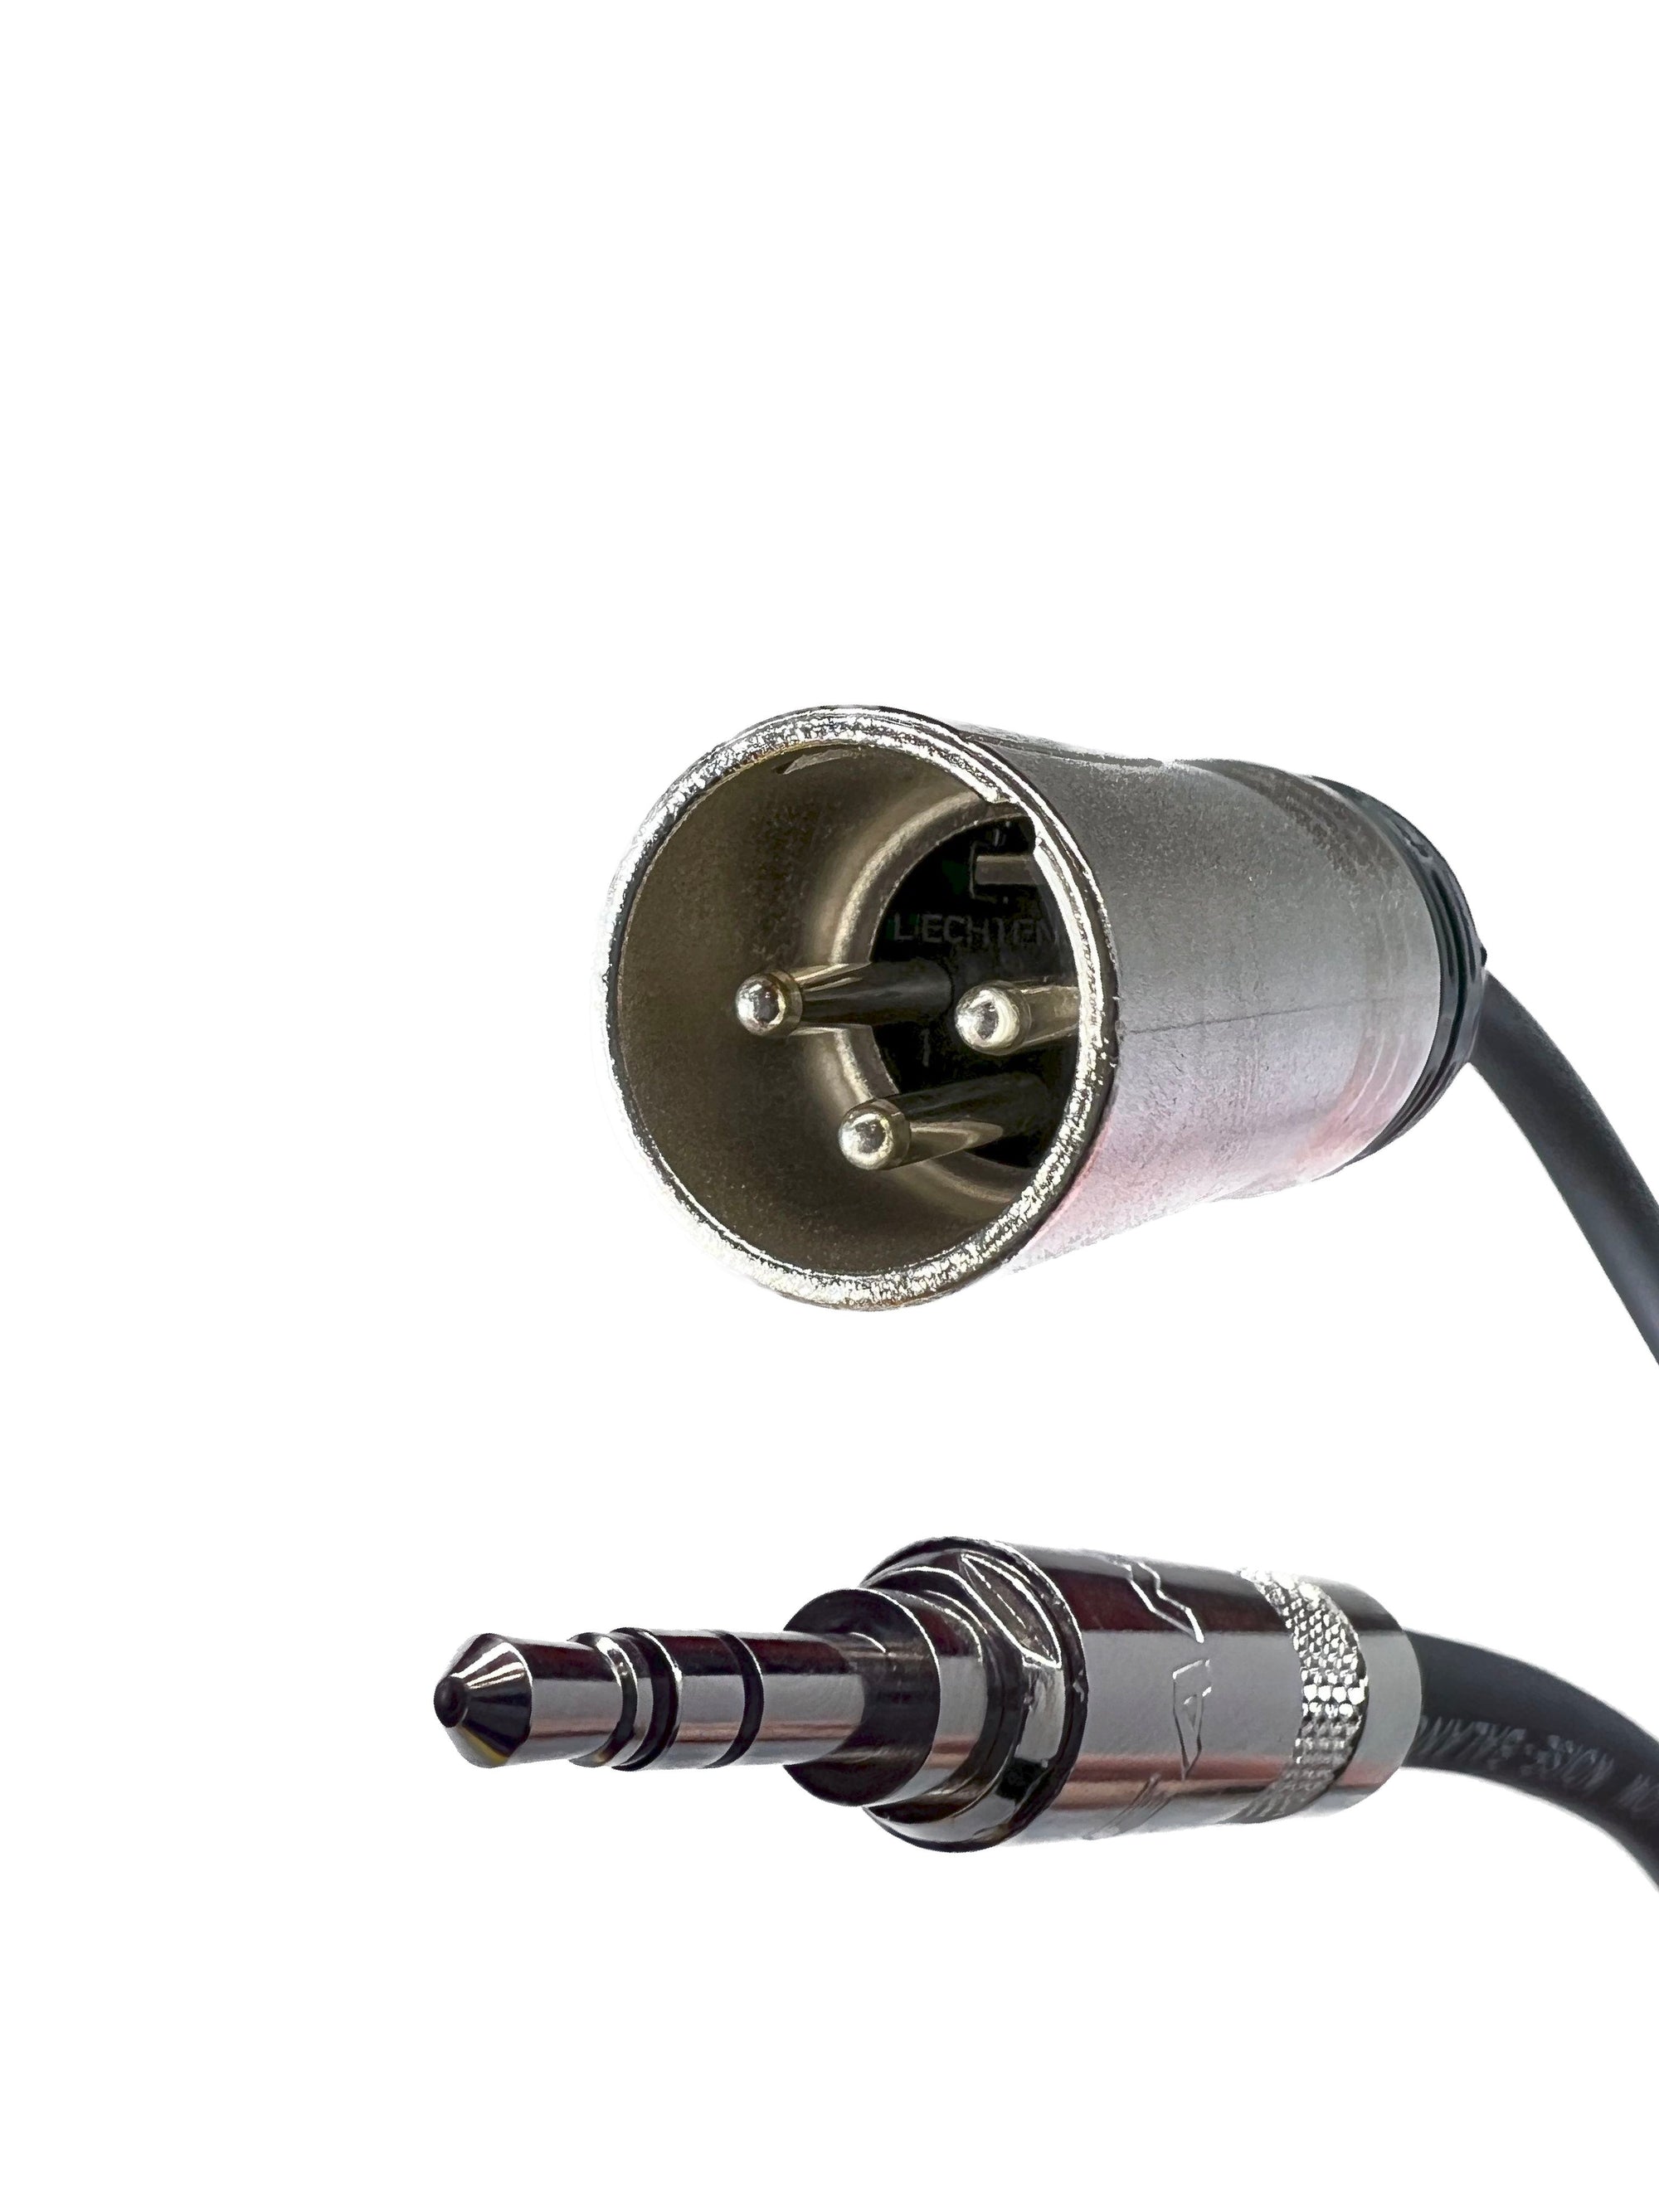 Balanced XLR Male to 3.5mm TRS Audio Cables with Neutrik Connectors All Lengths Available